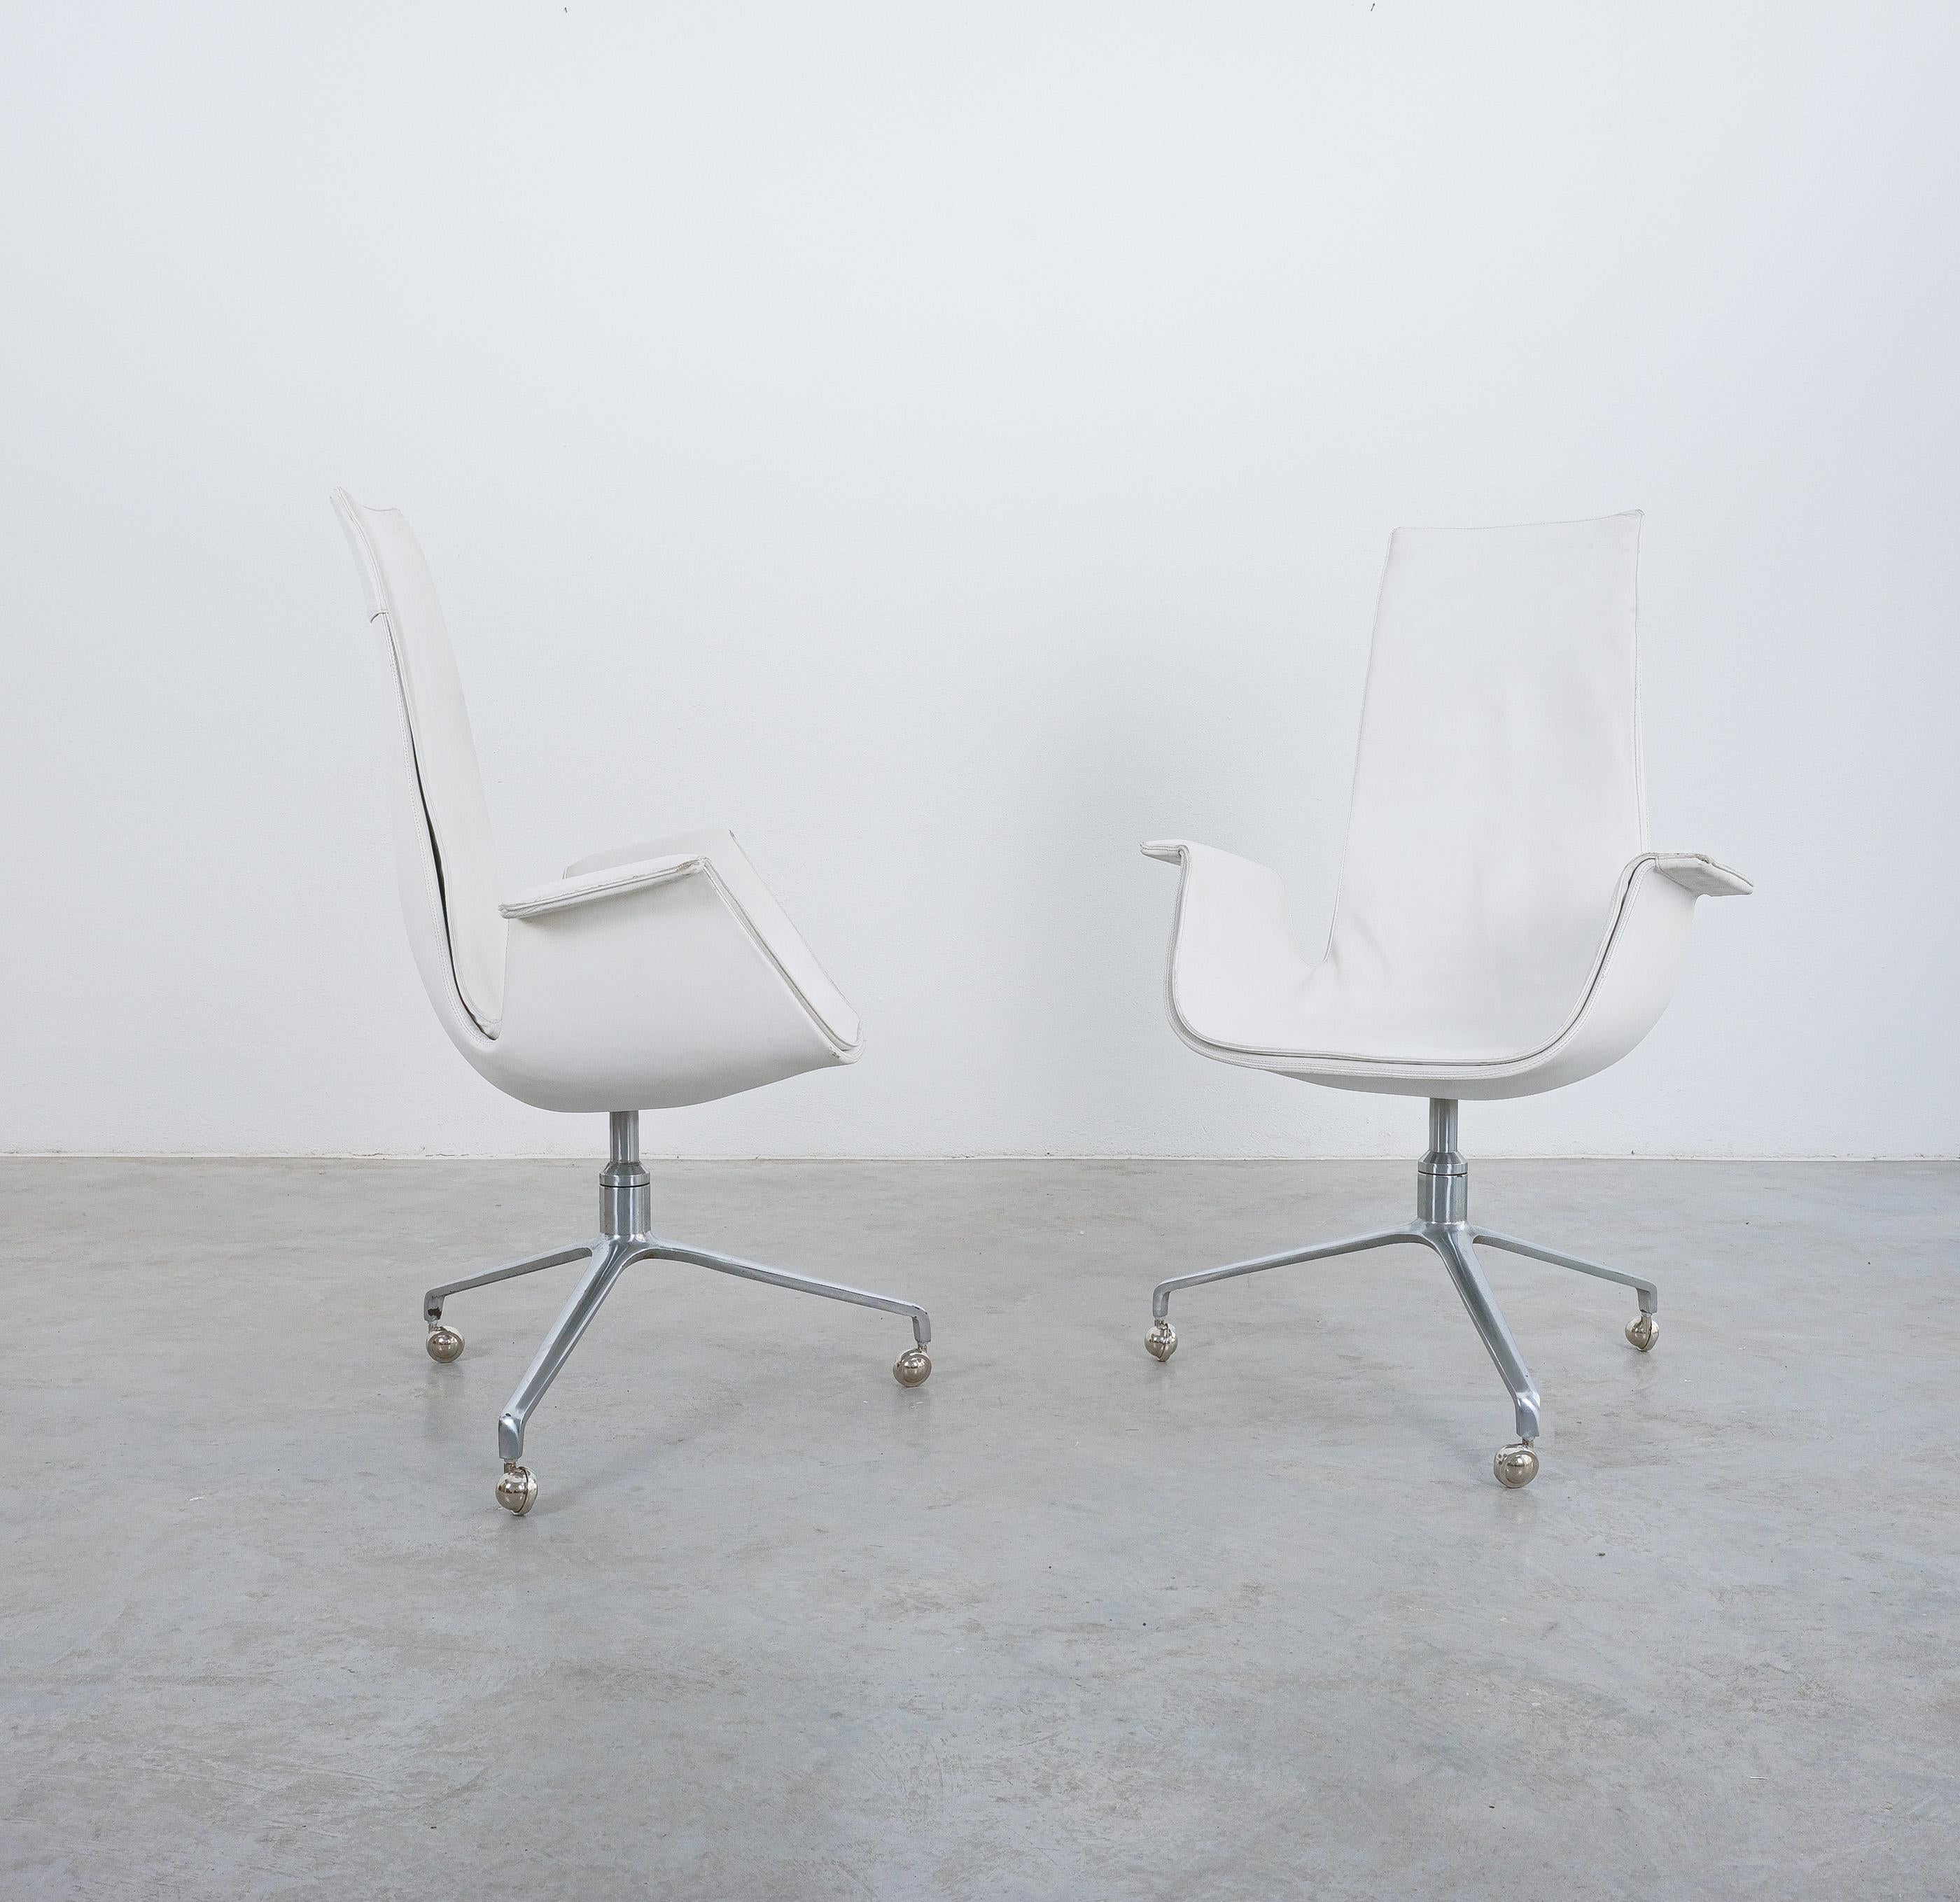 Mid-Century Modern Fabricius and Kastholm White High Back Desk Chairs (3) Swivel Base FK 6725, 1964 For Sale